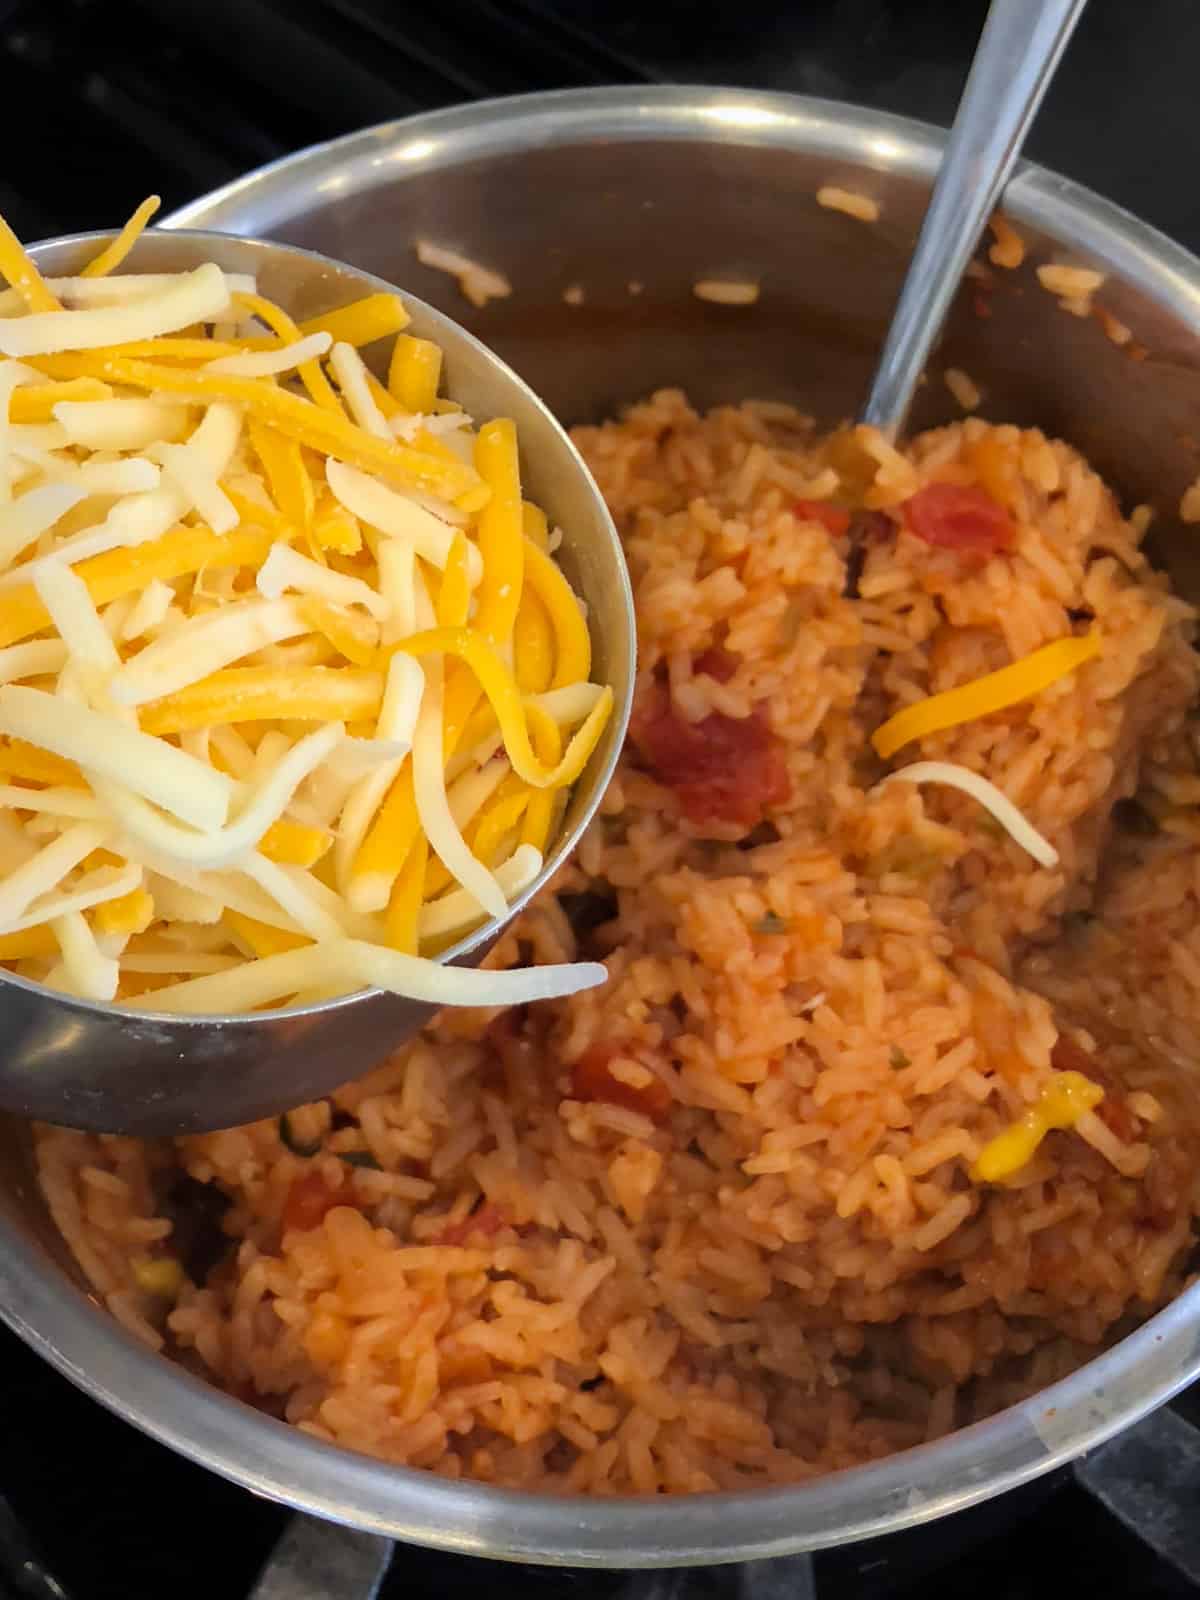 A measuring cup of grated cheese being dumped into a pot of cooked rice.